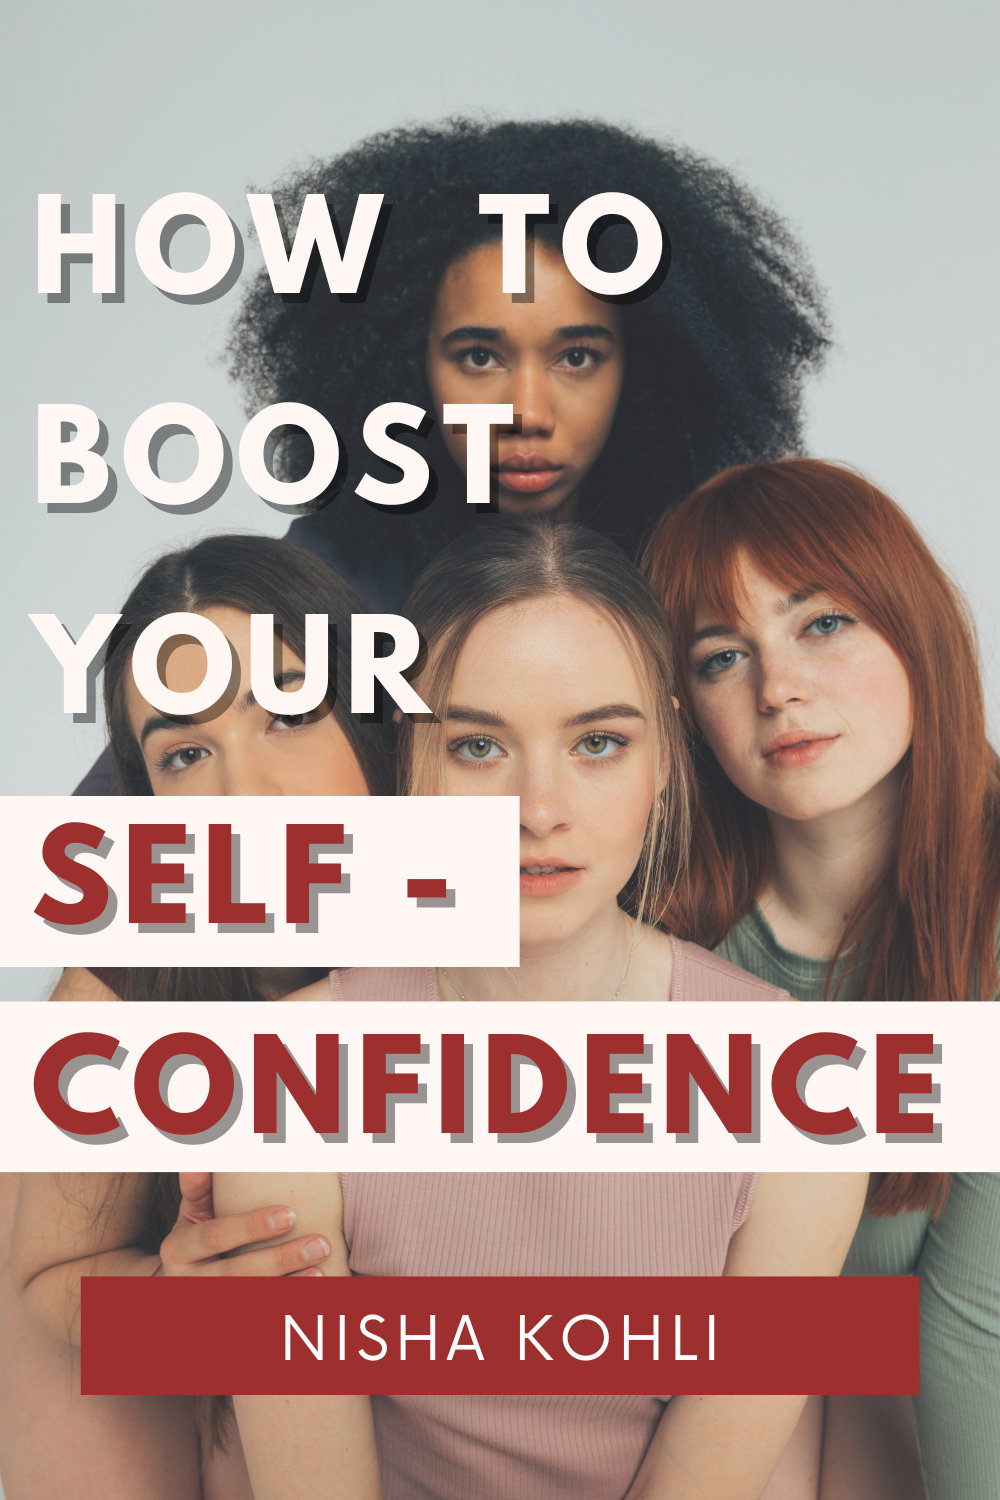 This pin is about how to boost your self confidence